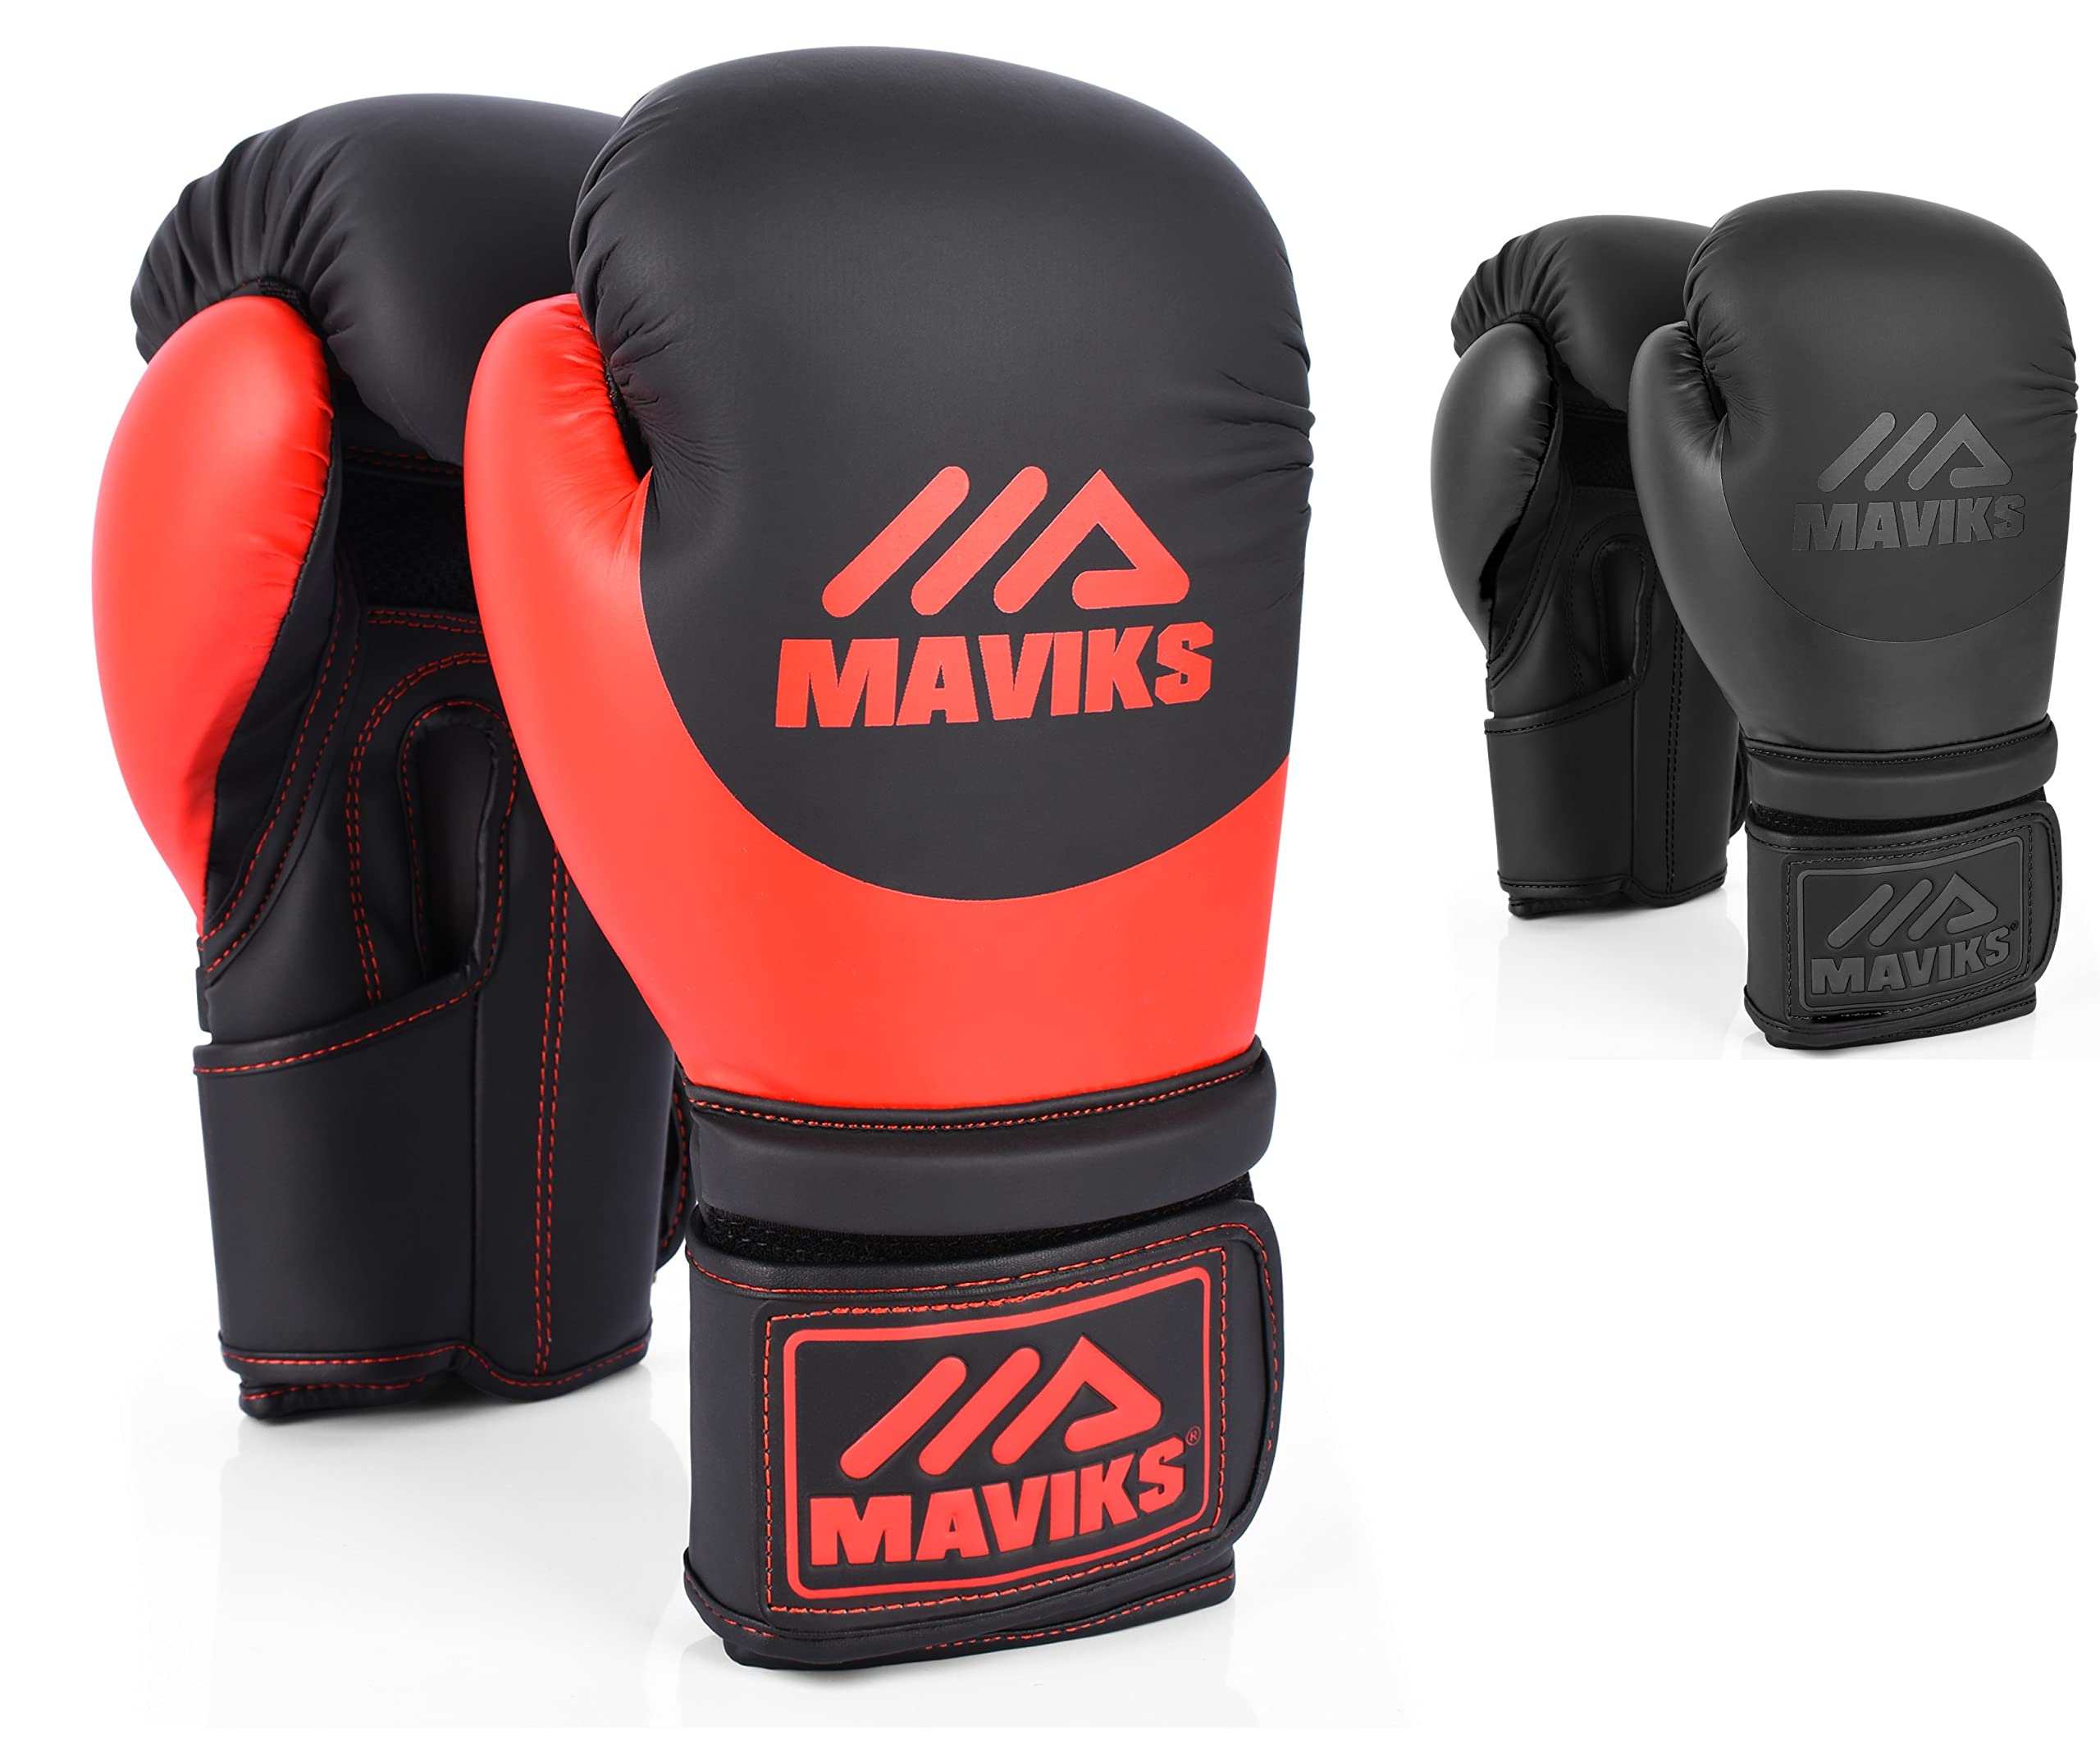 MAVIKS Boxing Gloves for Gloves Thai, Training, MMA and Heavy Heavy Sparring, | Men Punching Red Bag Women Non-Toxic oz Gloves Training Mitts Muay Bag | Workout for 16